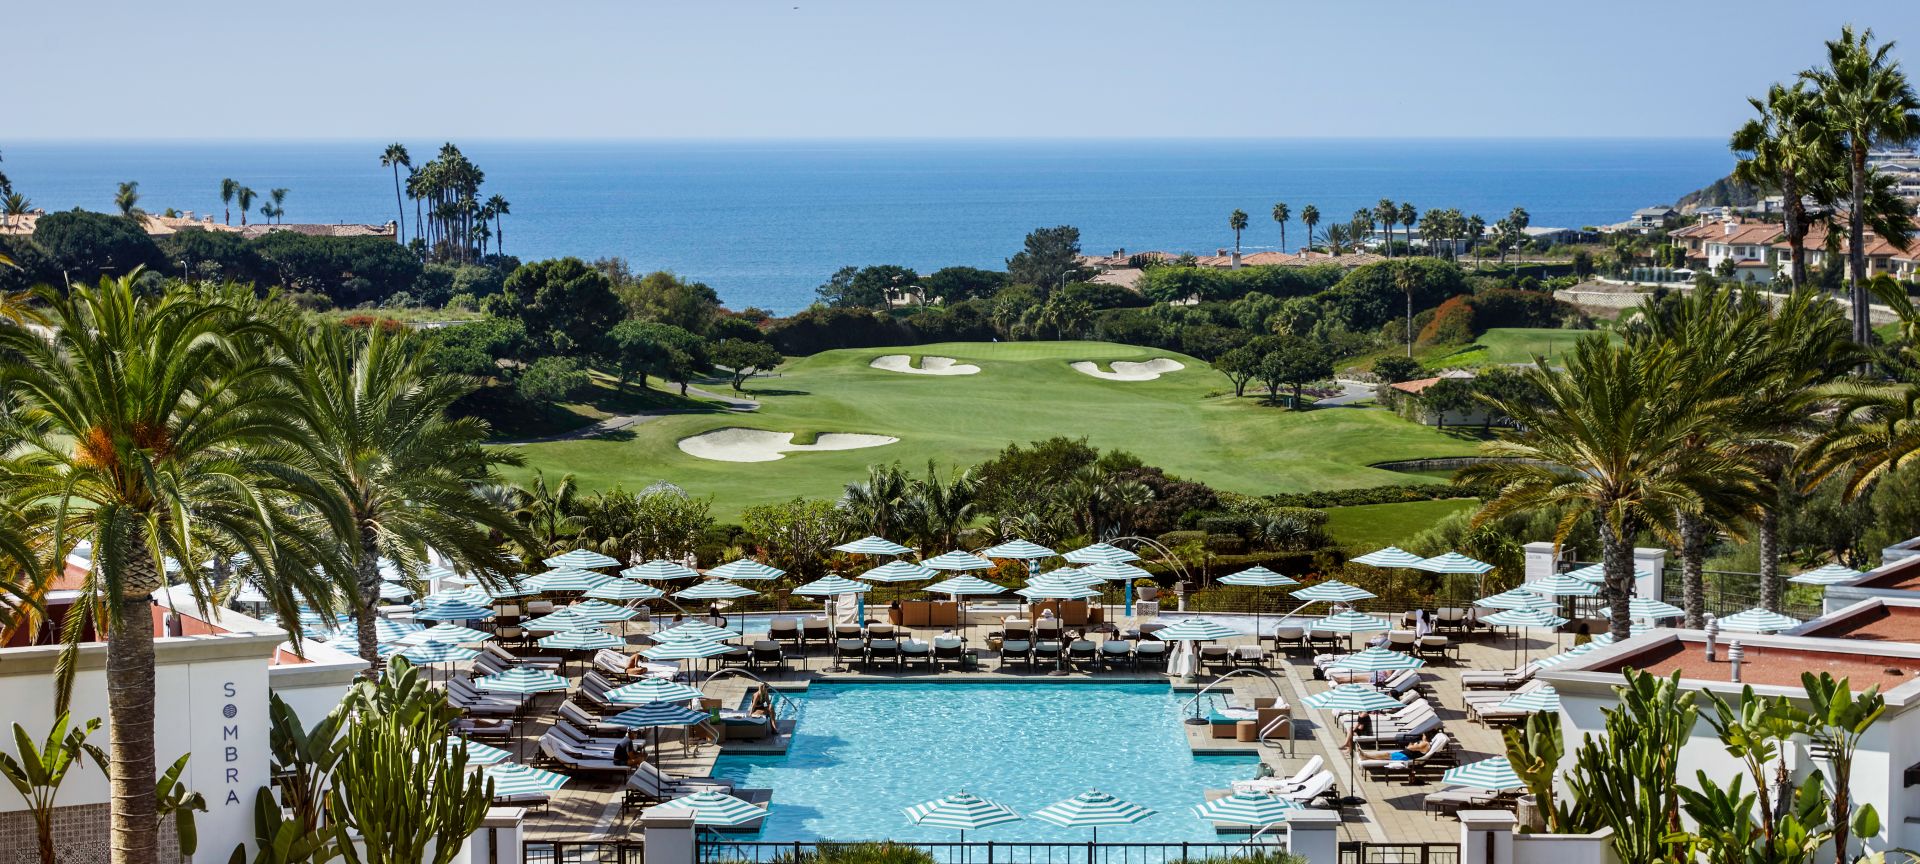 Elevated view of the swimming pool and golf course at Waldorf Astoria Monarch Beach